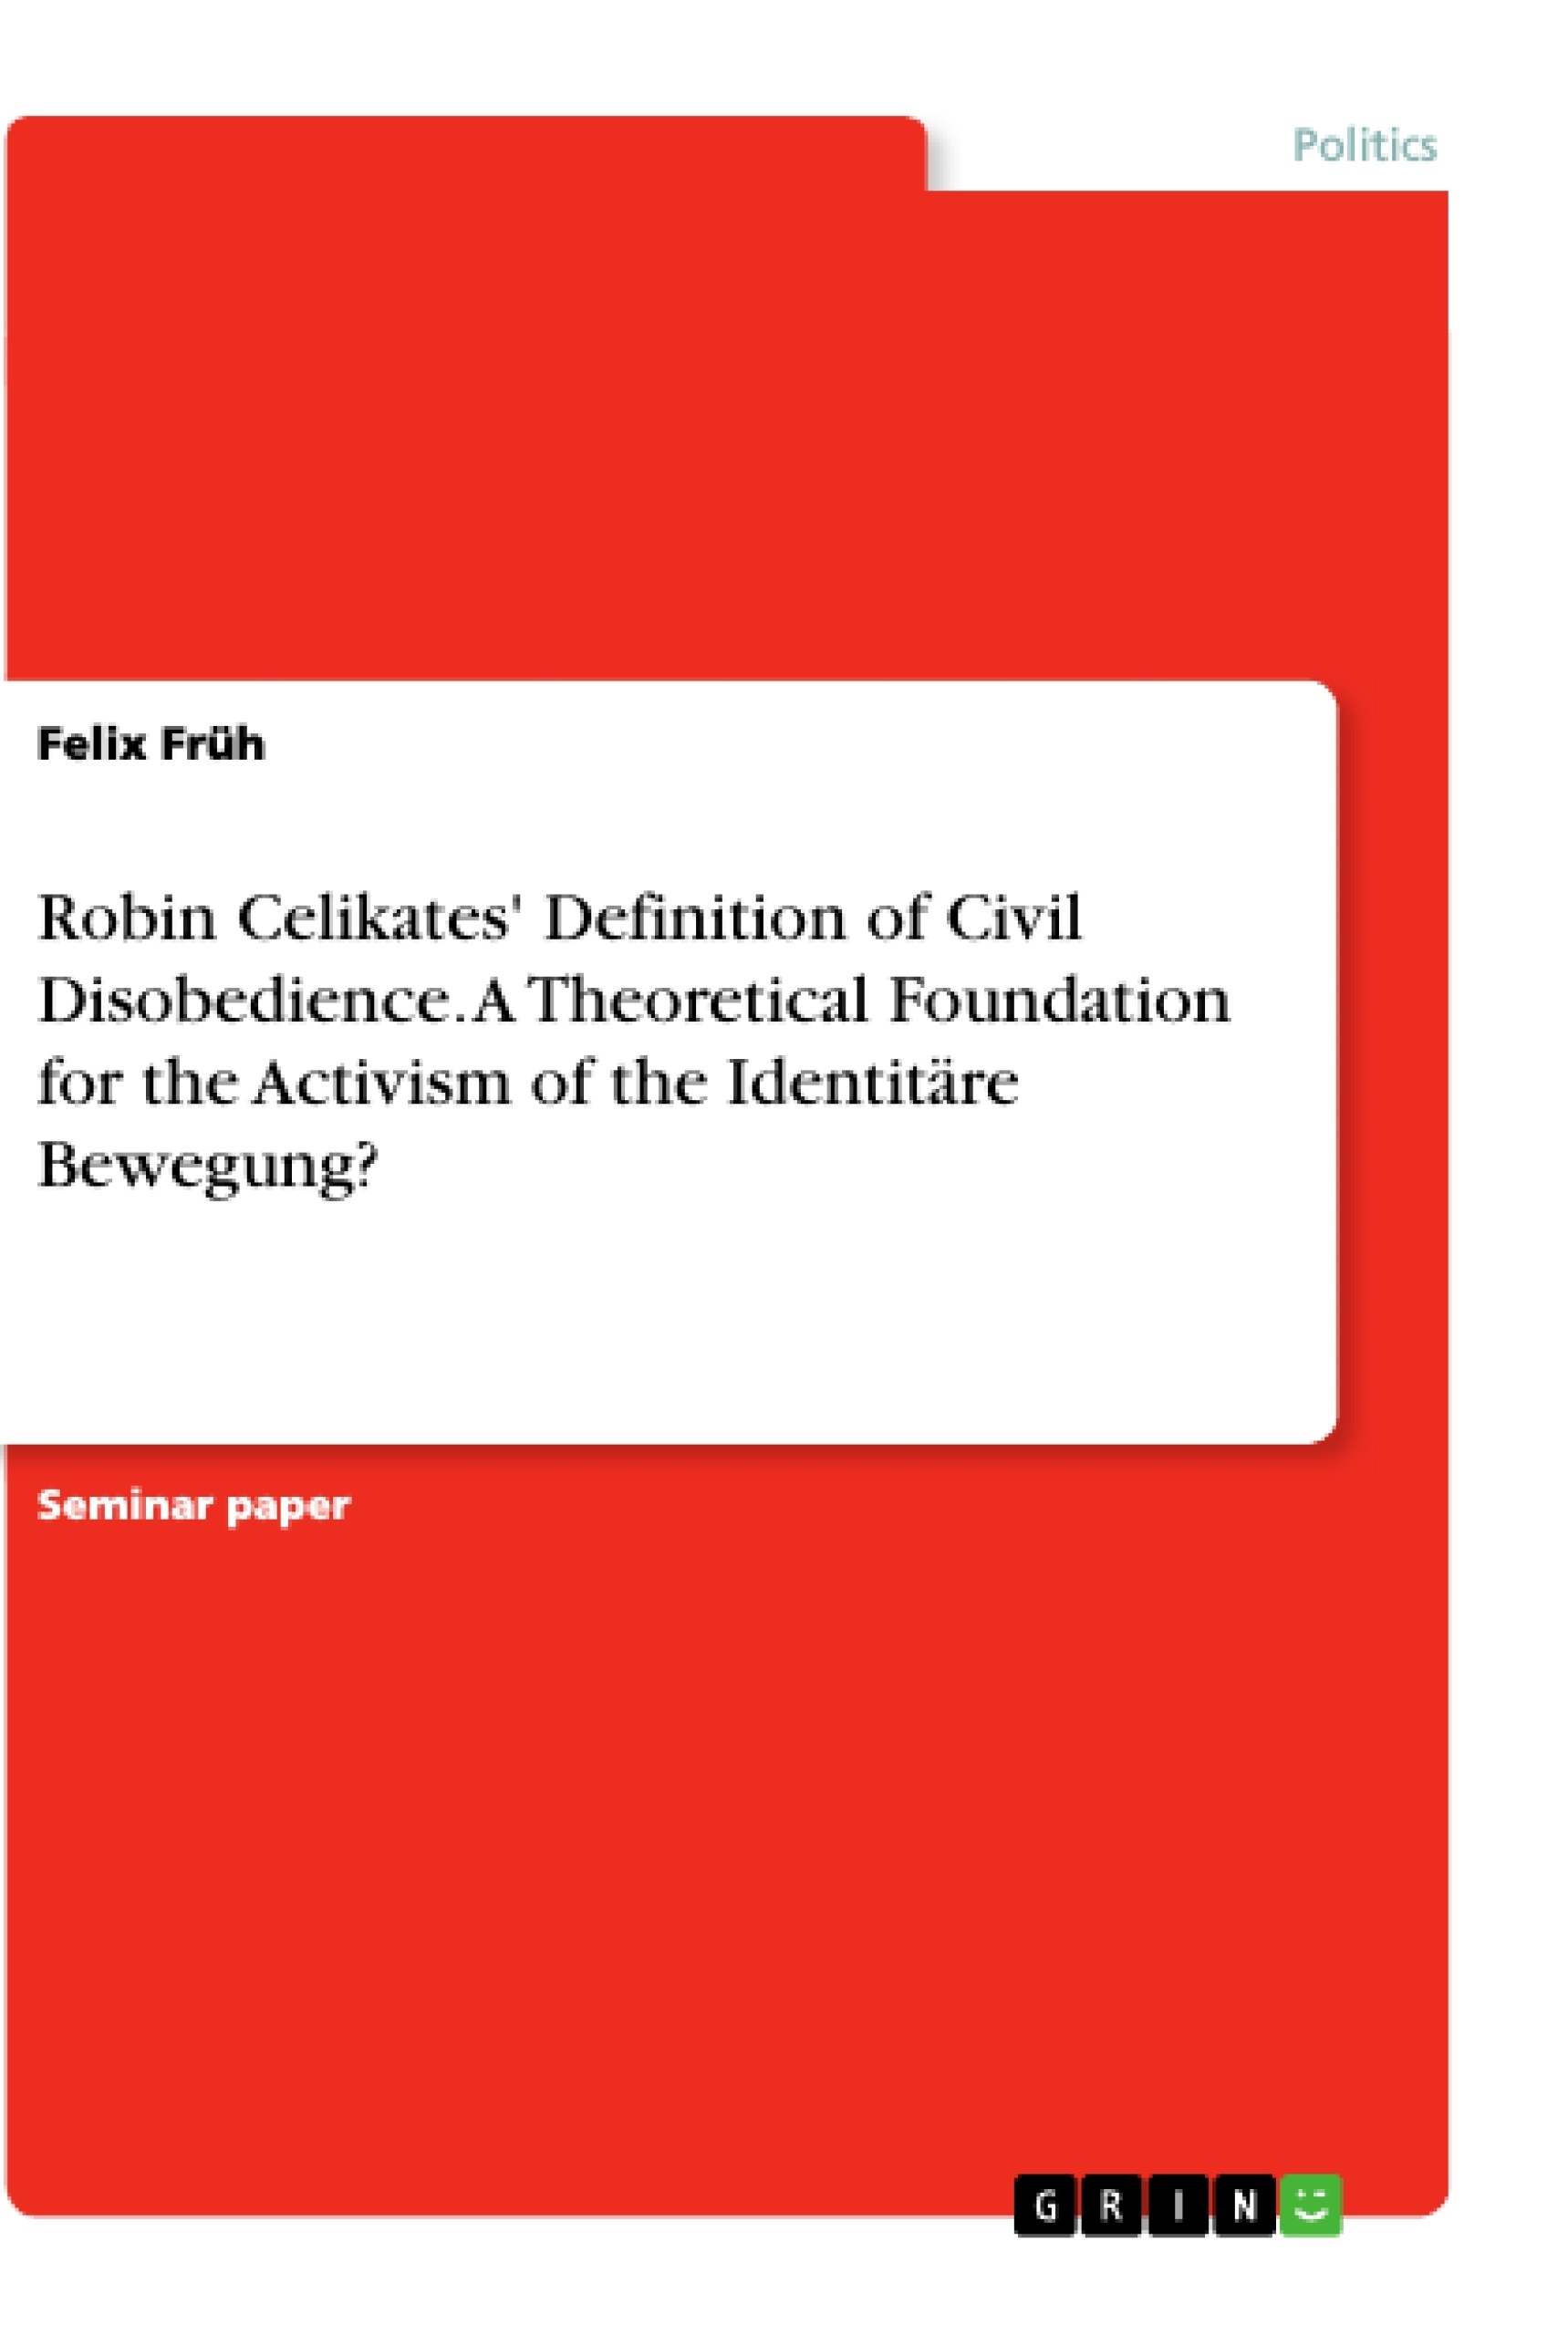 Title: Robin Celikates' Definition of Civil Disobedience. A Theoretical Foundation for the Activism of the Identitäre Bewegung?